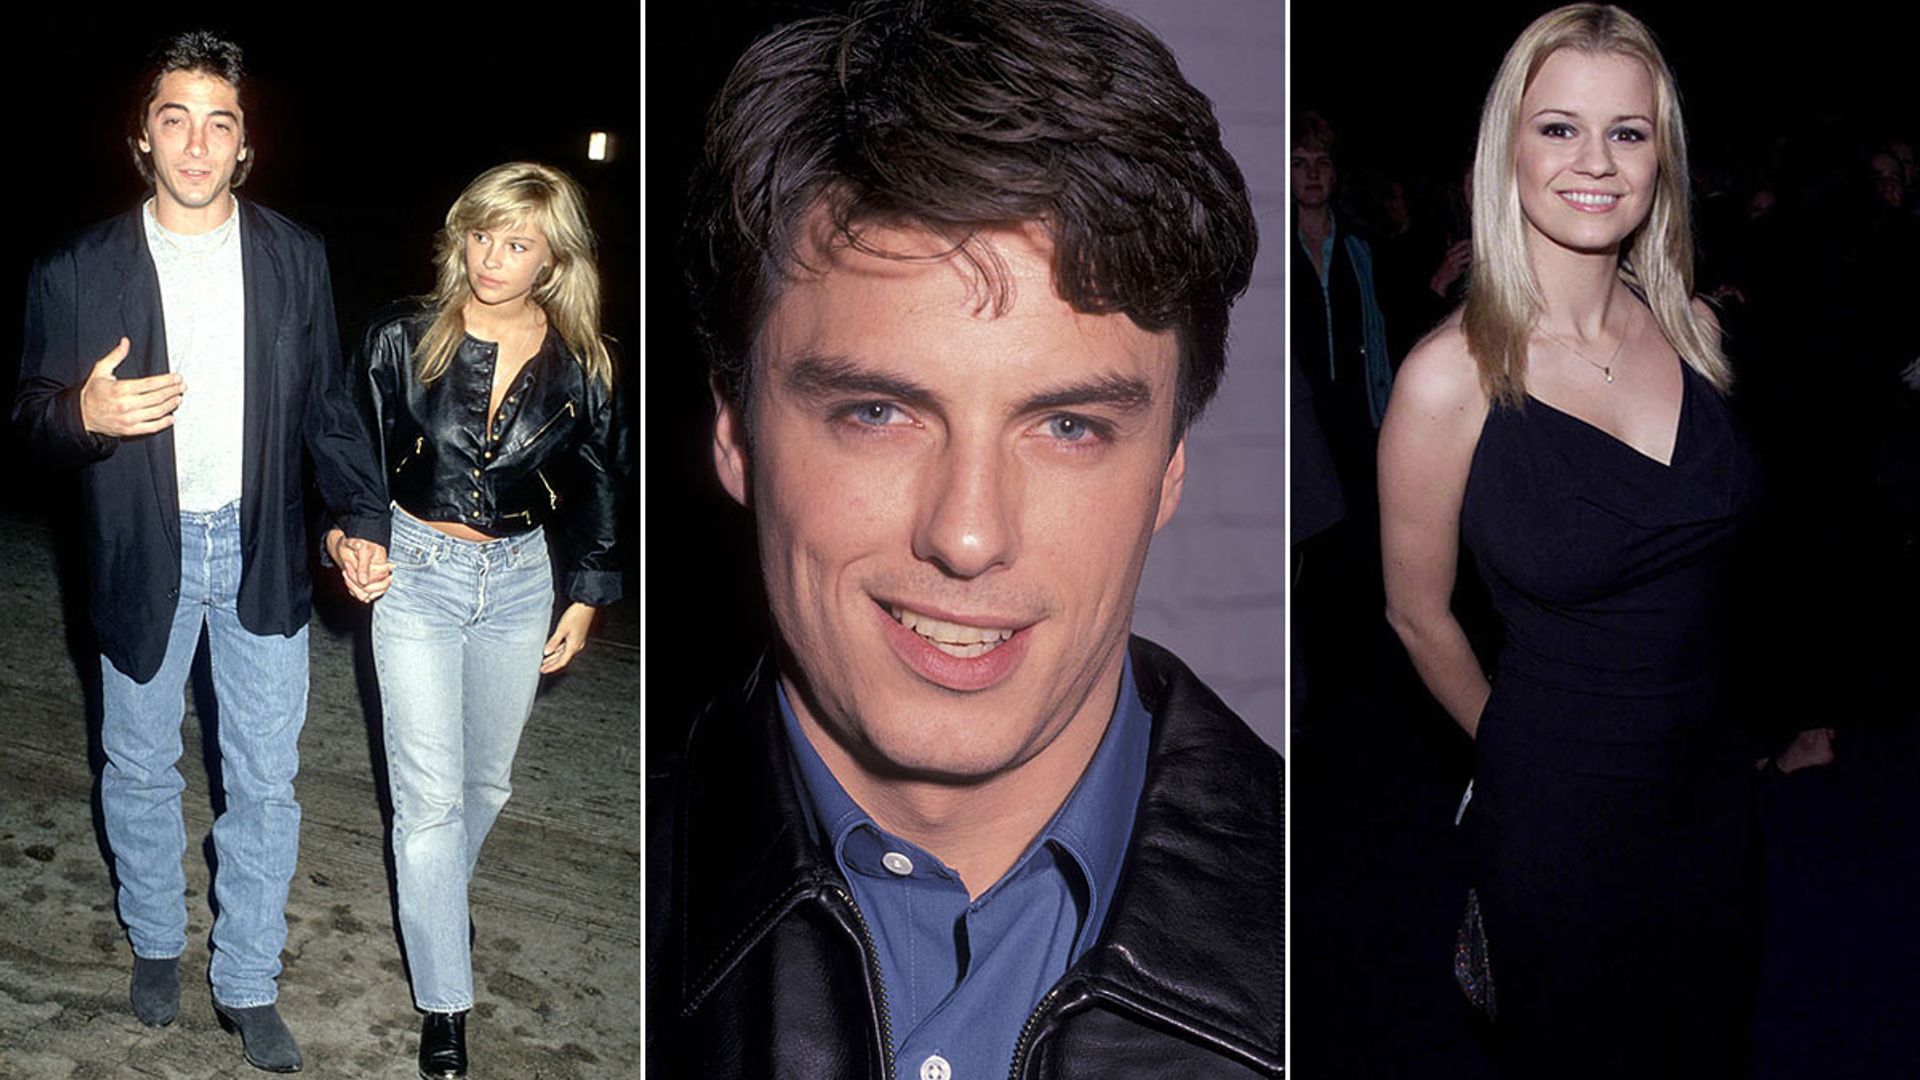 What did Dancing on Ice stars do before finding fame? From John Barrowman to Pamela Anderson